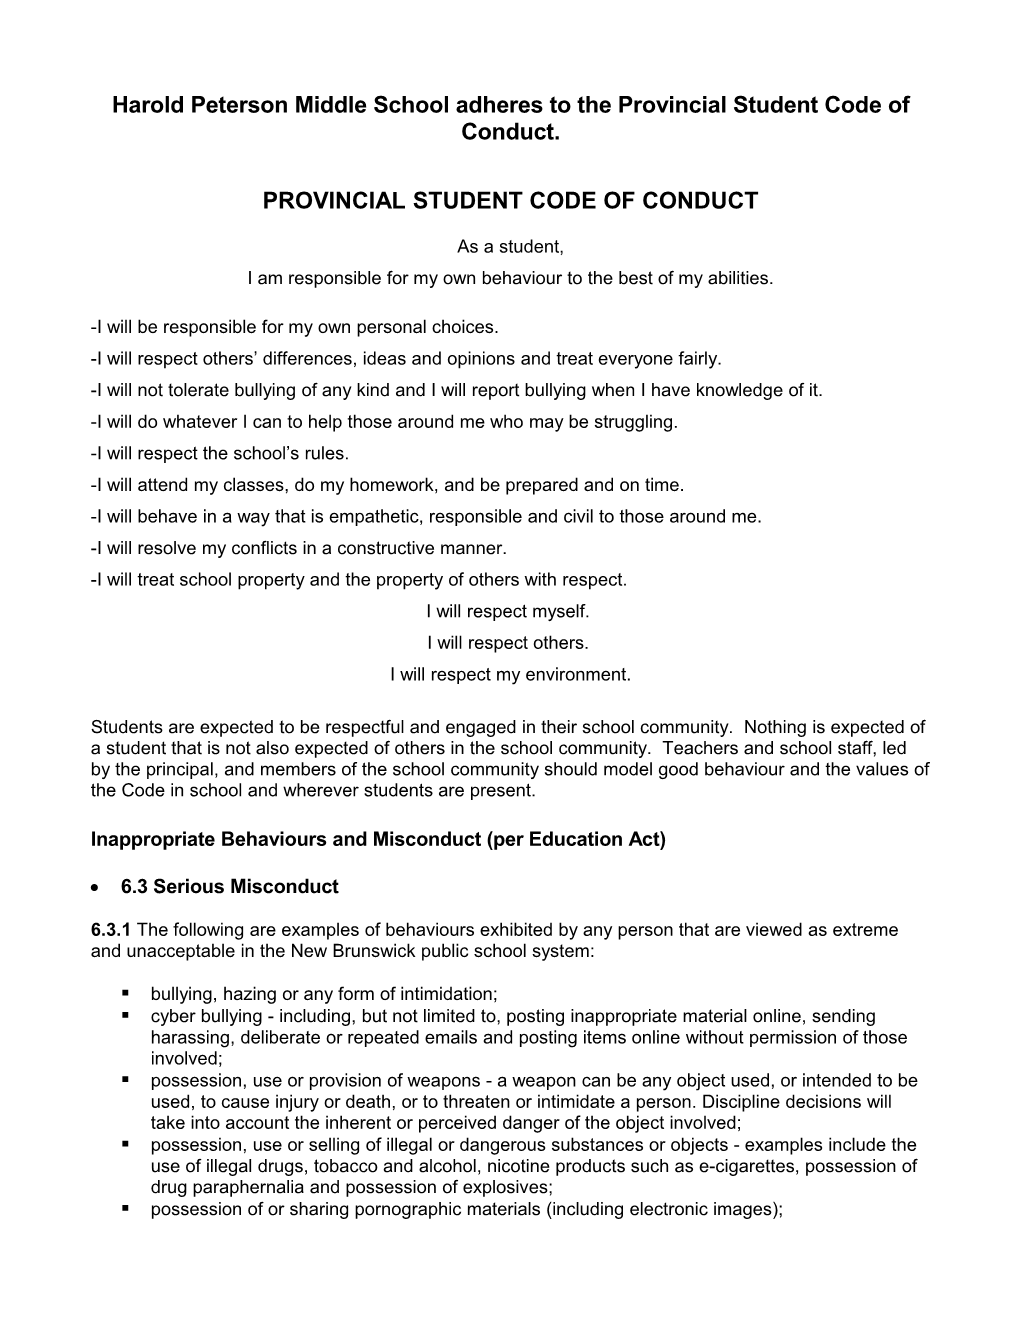 Harold Peterson Middle School Adheres to the Provincial Student Code of Conduct